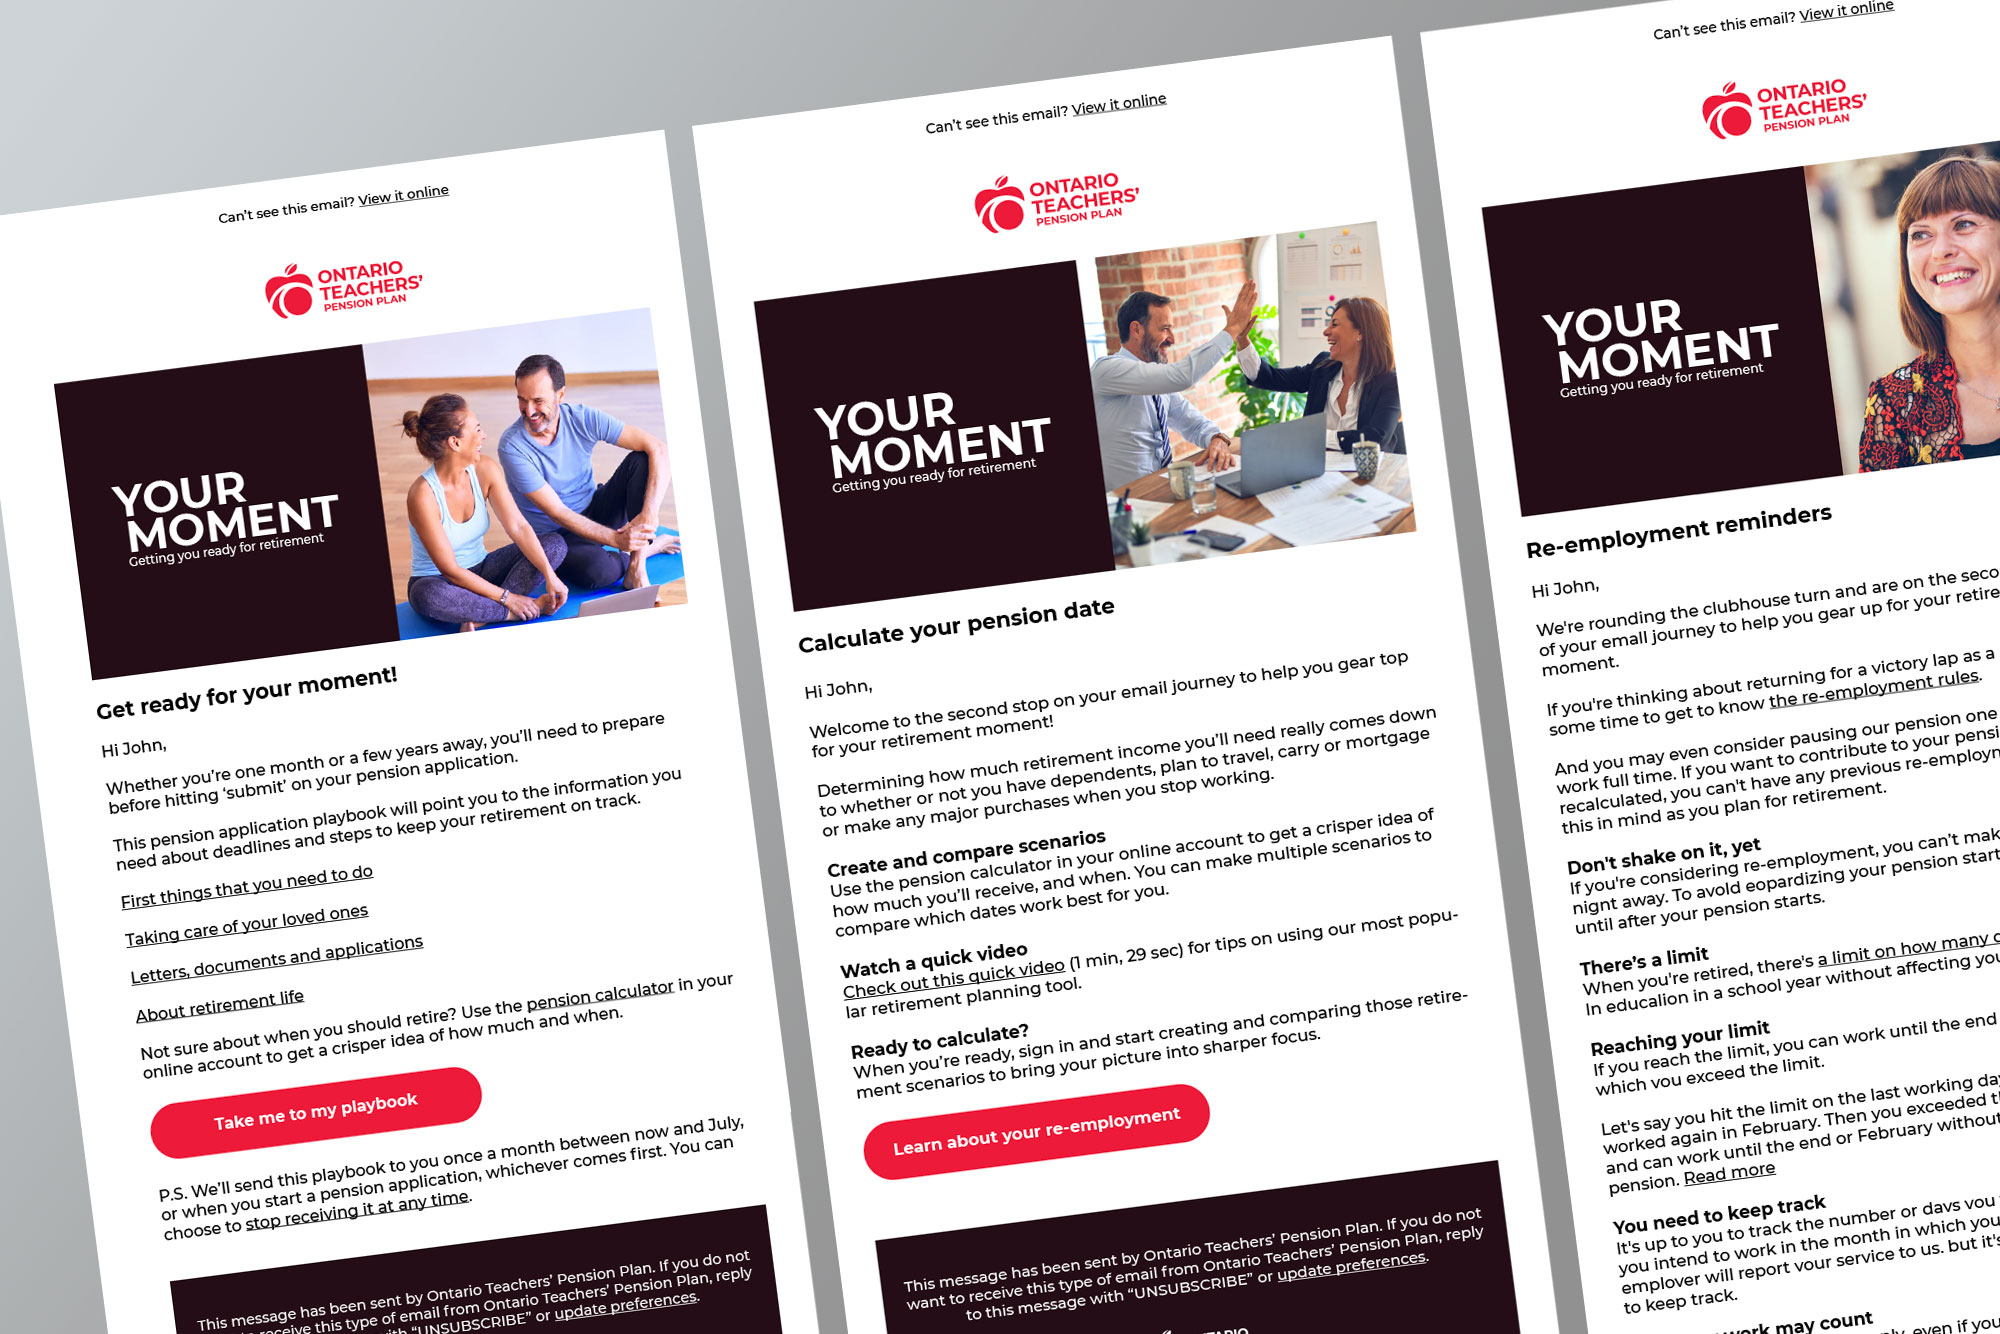 Sample emails from Your Moment campaign